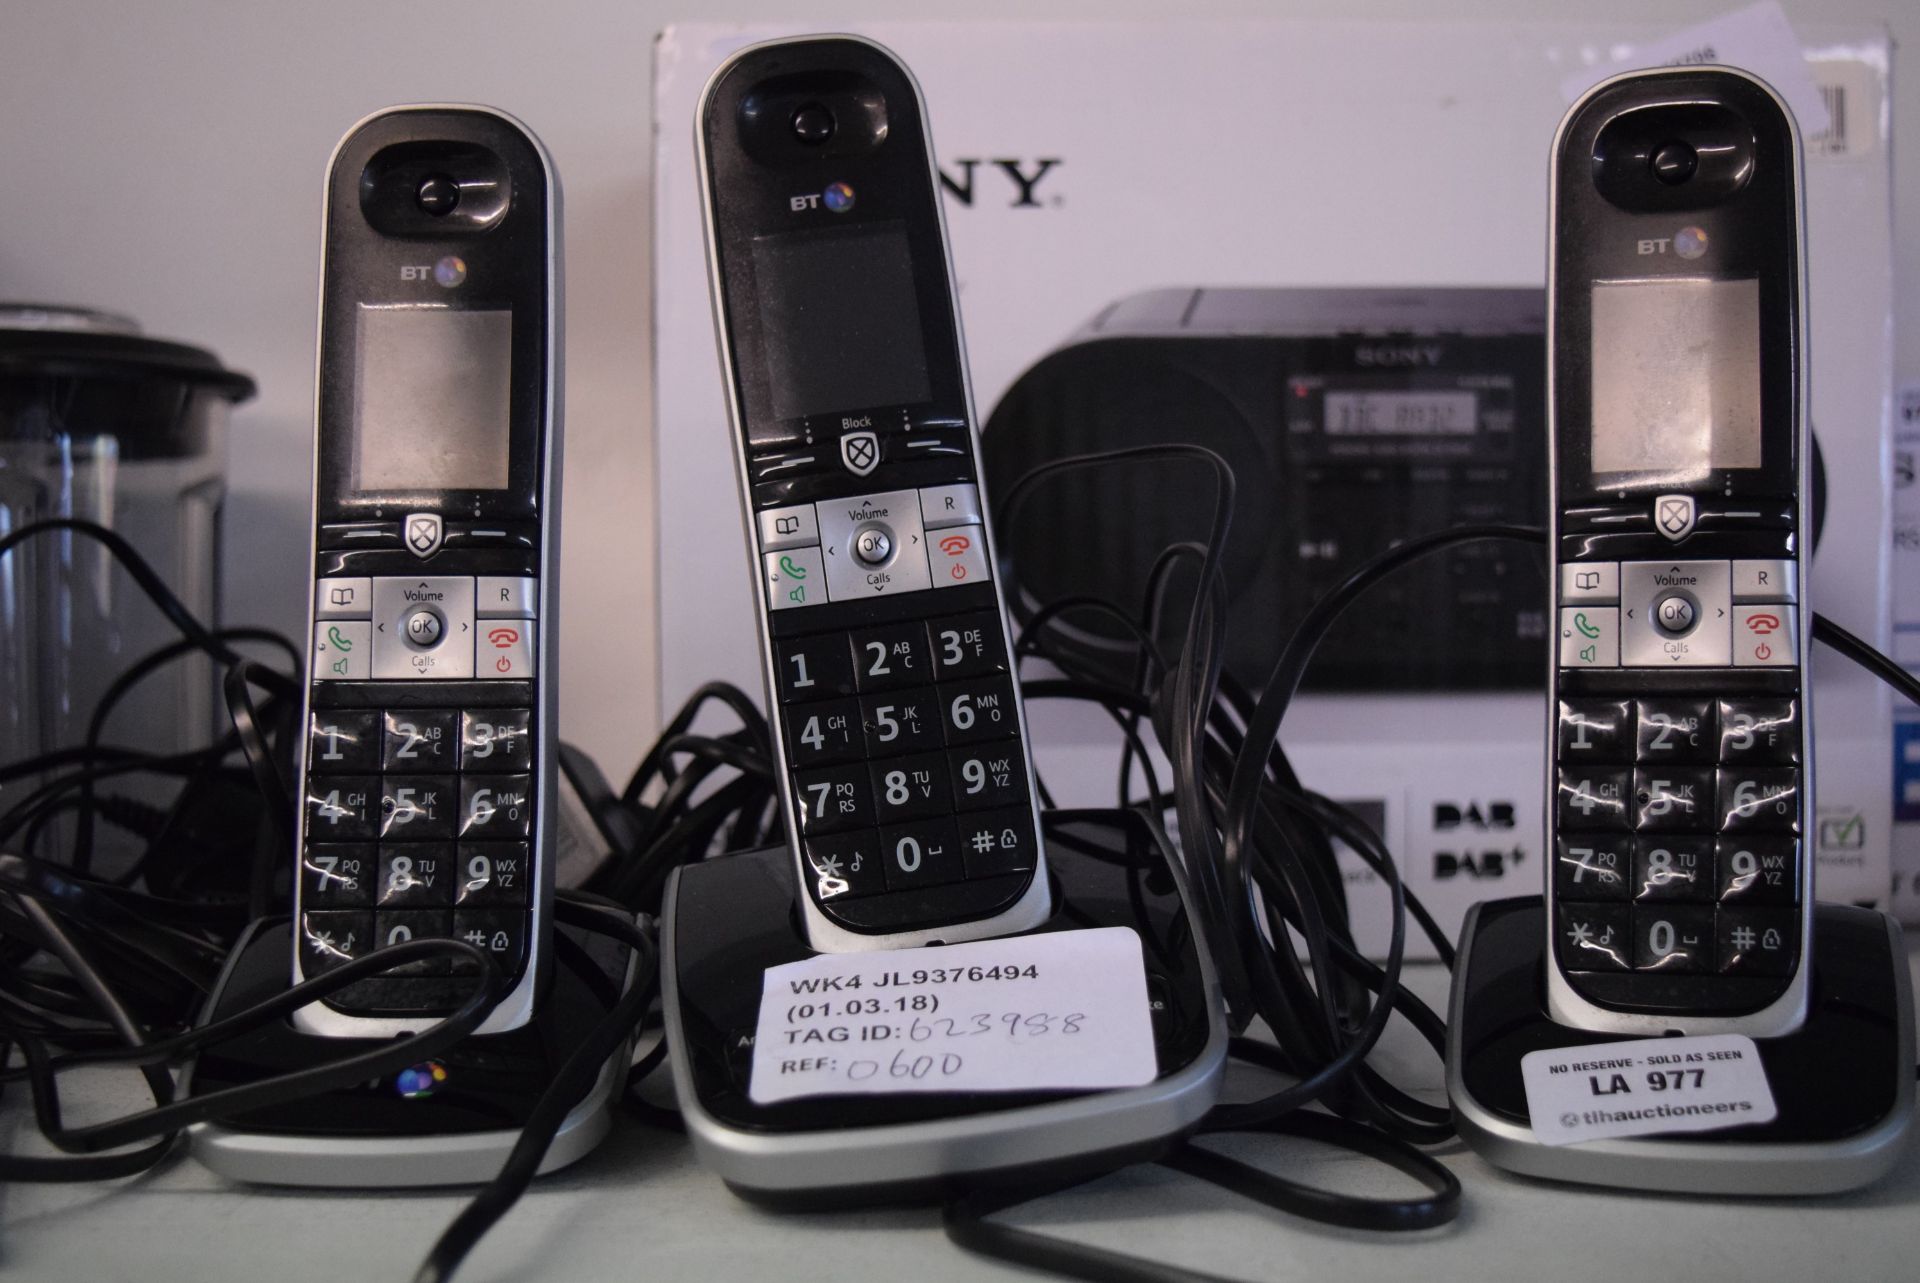 1 x BT HOME PHONE SYSTEM RRP £60 01.03.18 623988 *PLEASE NOTE THAT THE BID PRICE IS MULTIPLIED BY